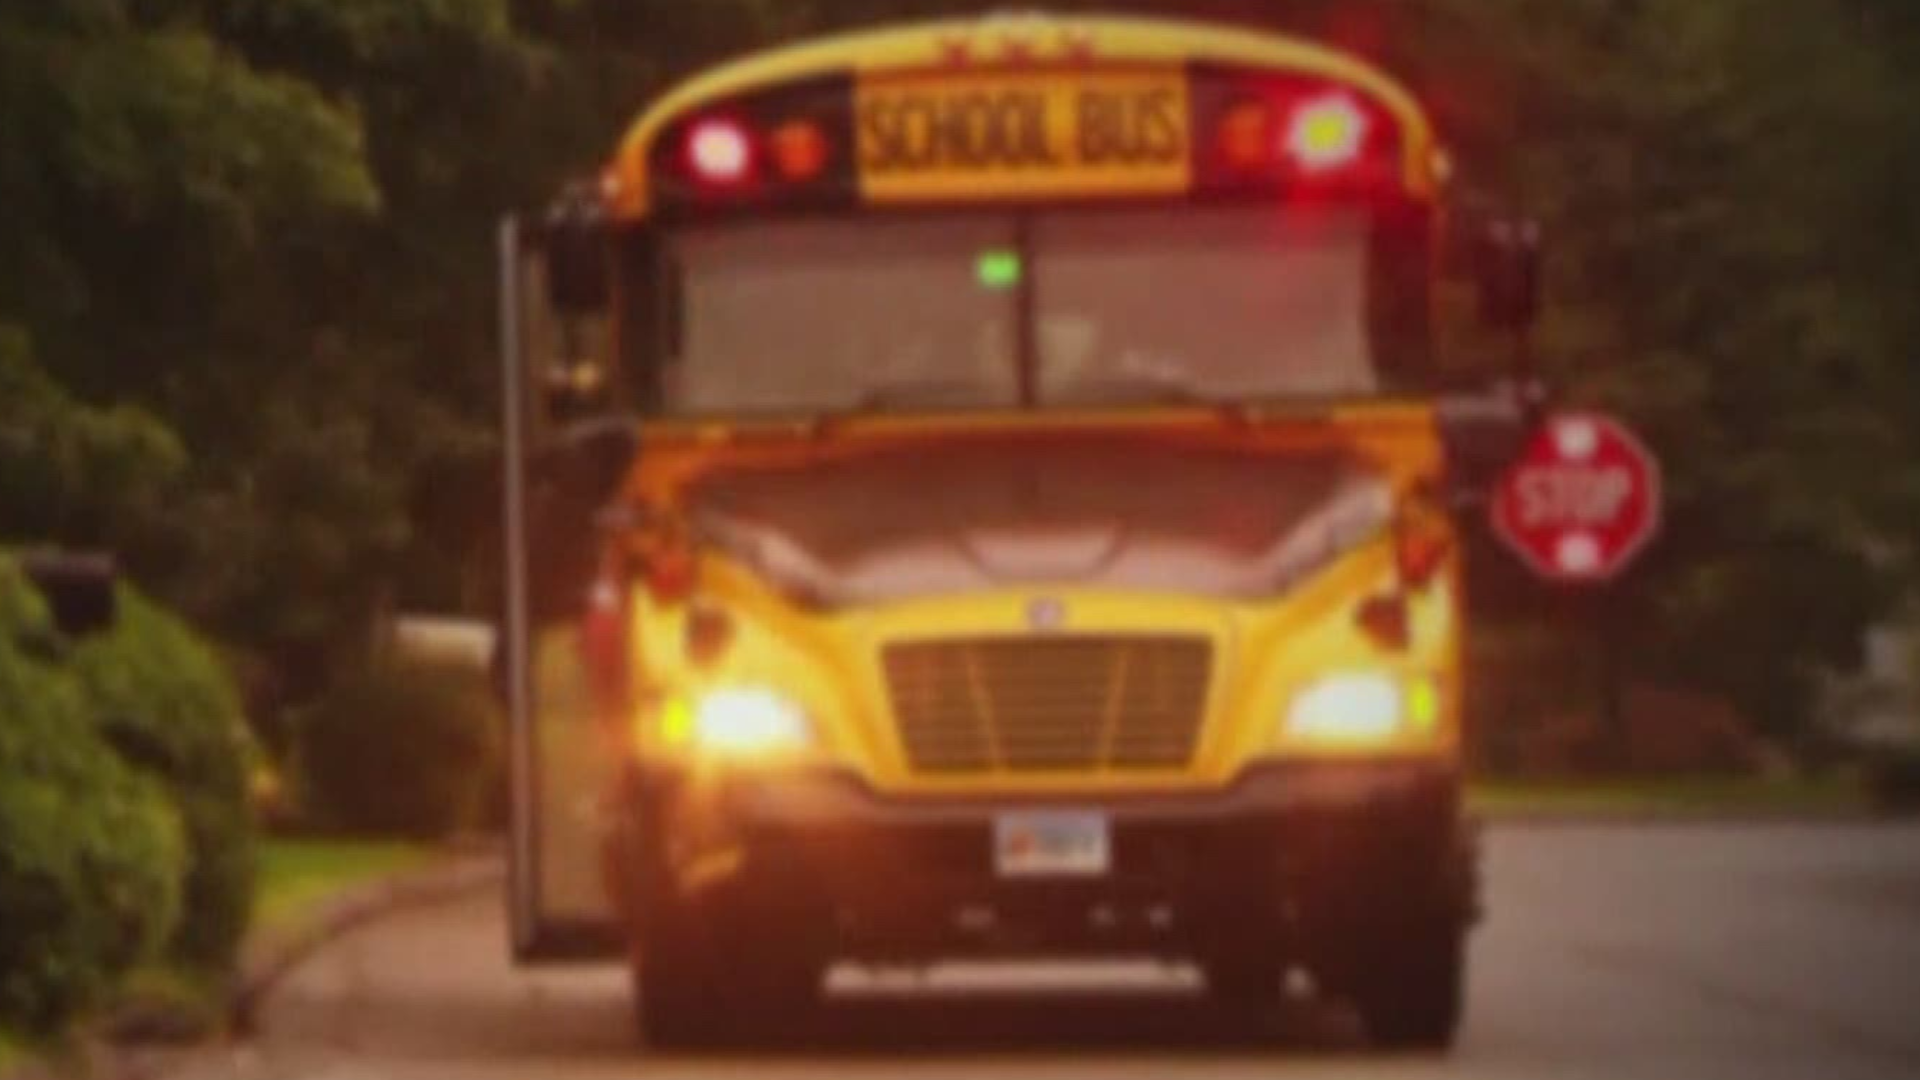 New legislation now requires drivers to stop for a school bus when no barrier separates the road lanes.